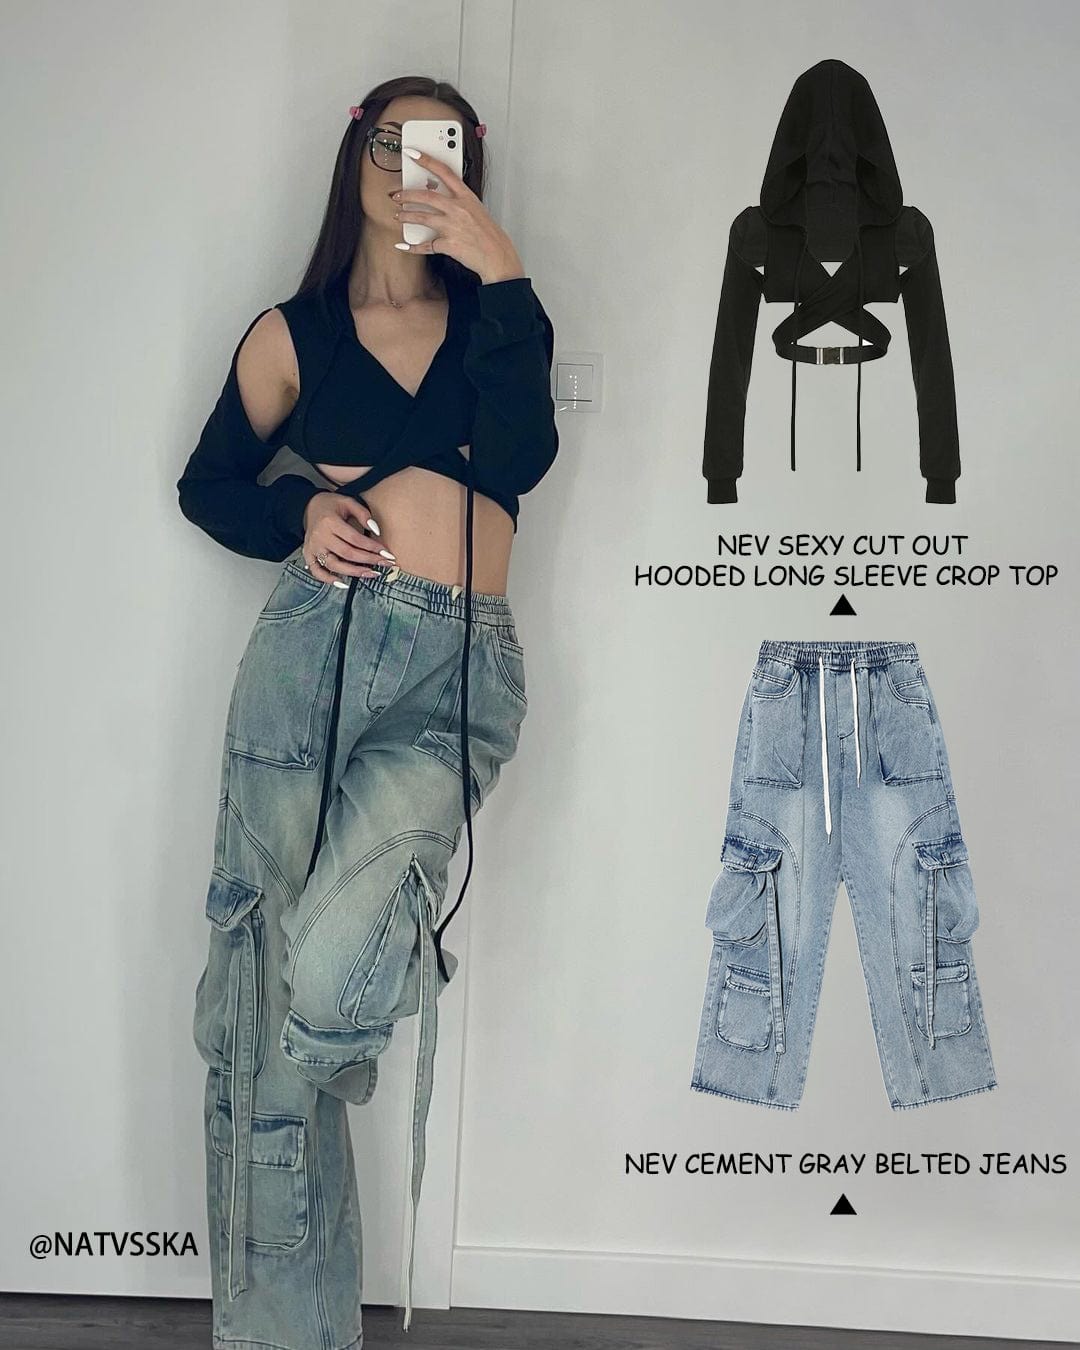 NEV Cement Gray Belted Jeans